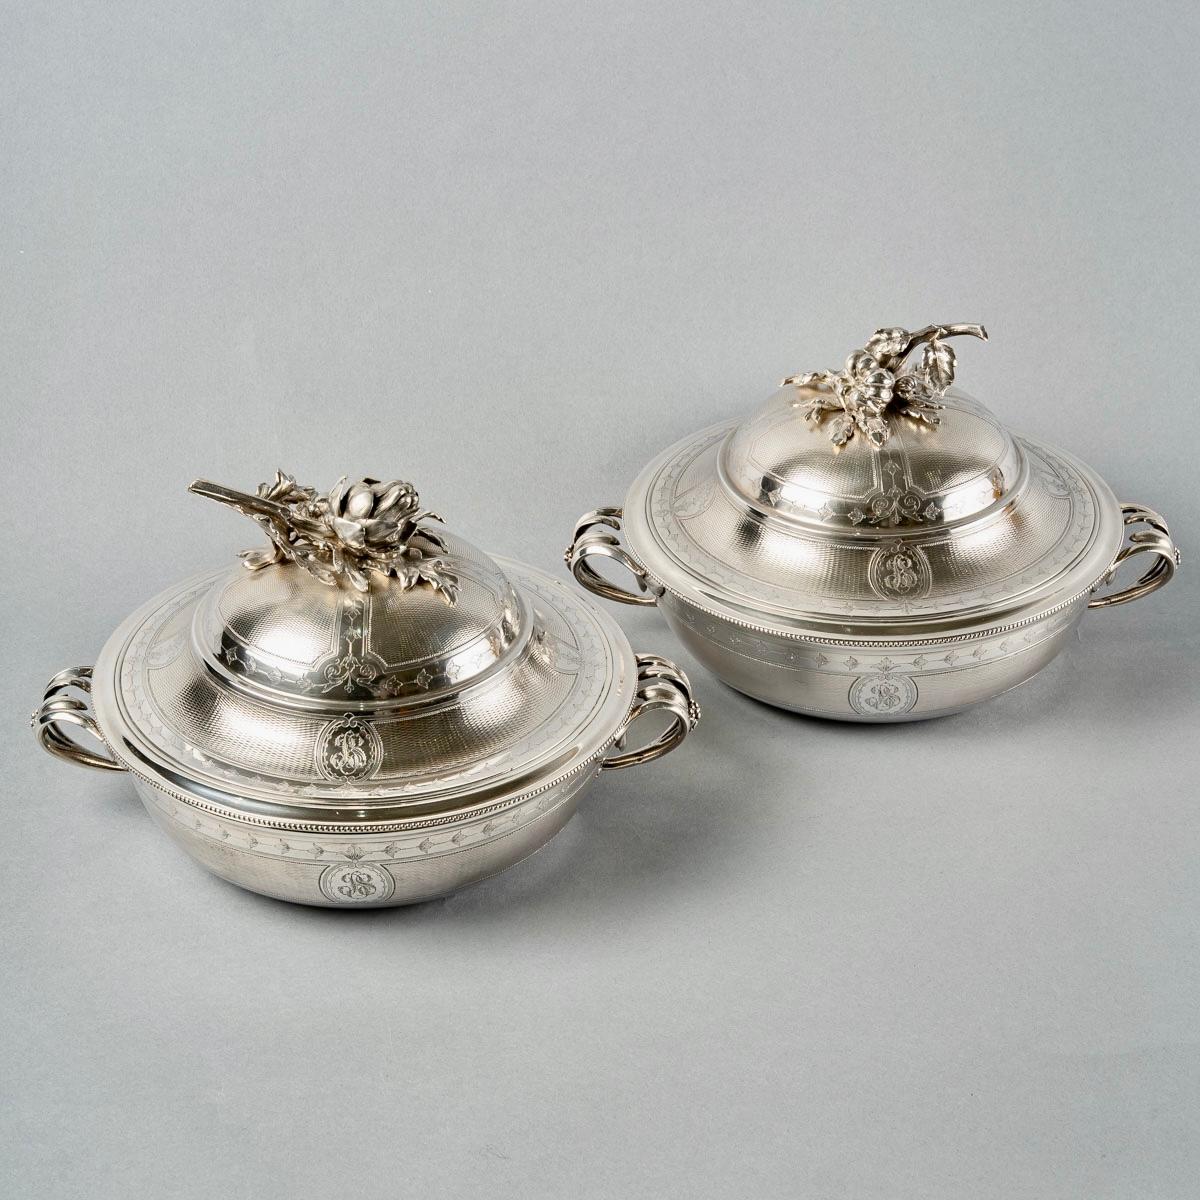 Pair of tureens made in 925/000 solid silver guilloché in a circular shape with side grips in a stylized vegetable shape. 

Lid surmounted by an artichoke stem in the round. Silver interior lining.

Title mark and goldsmith's mark on all